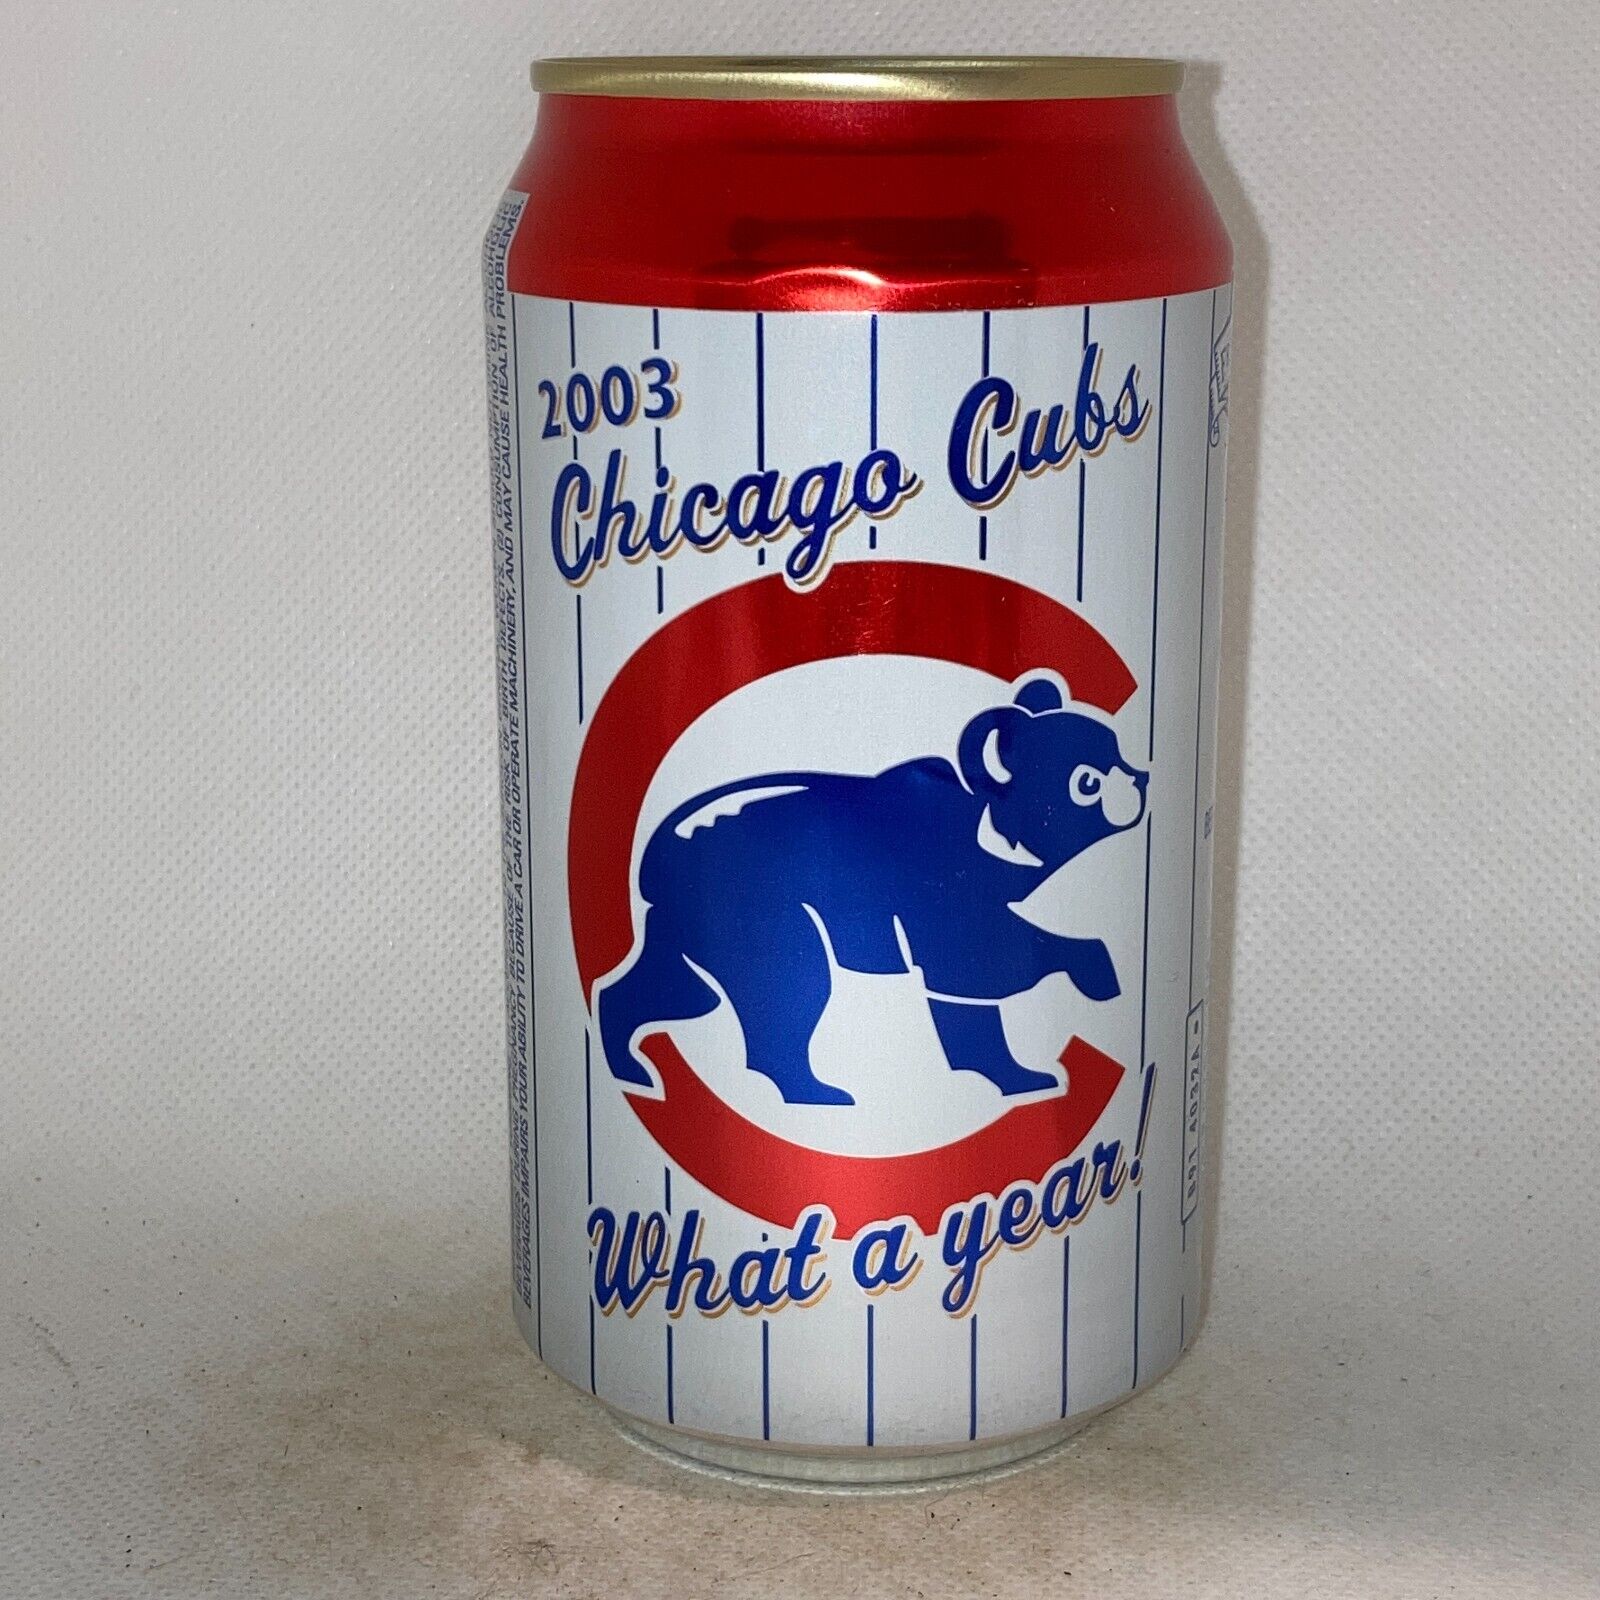 2003 Chicago Cubs Old Style beer can, bottom opened